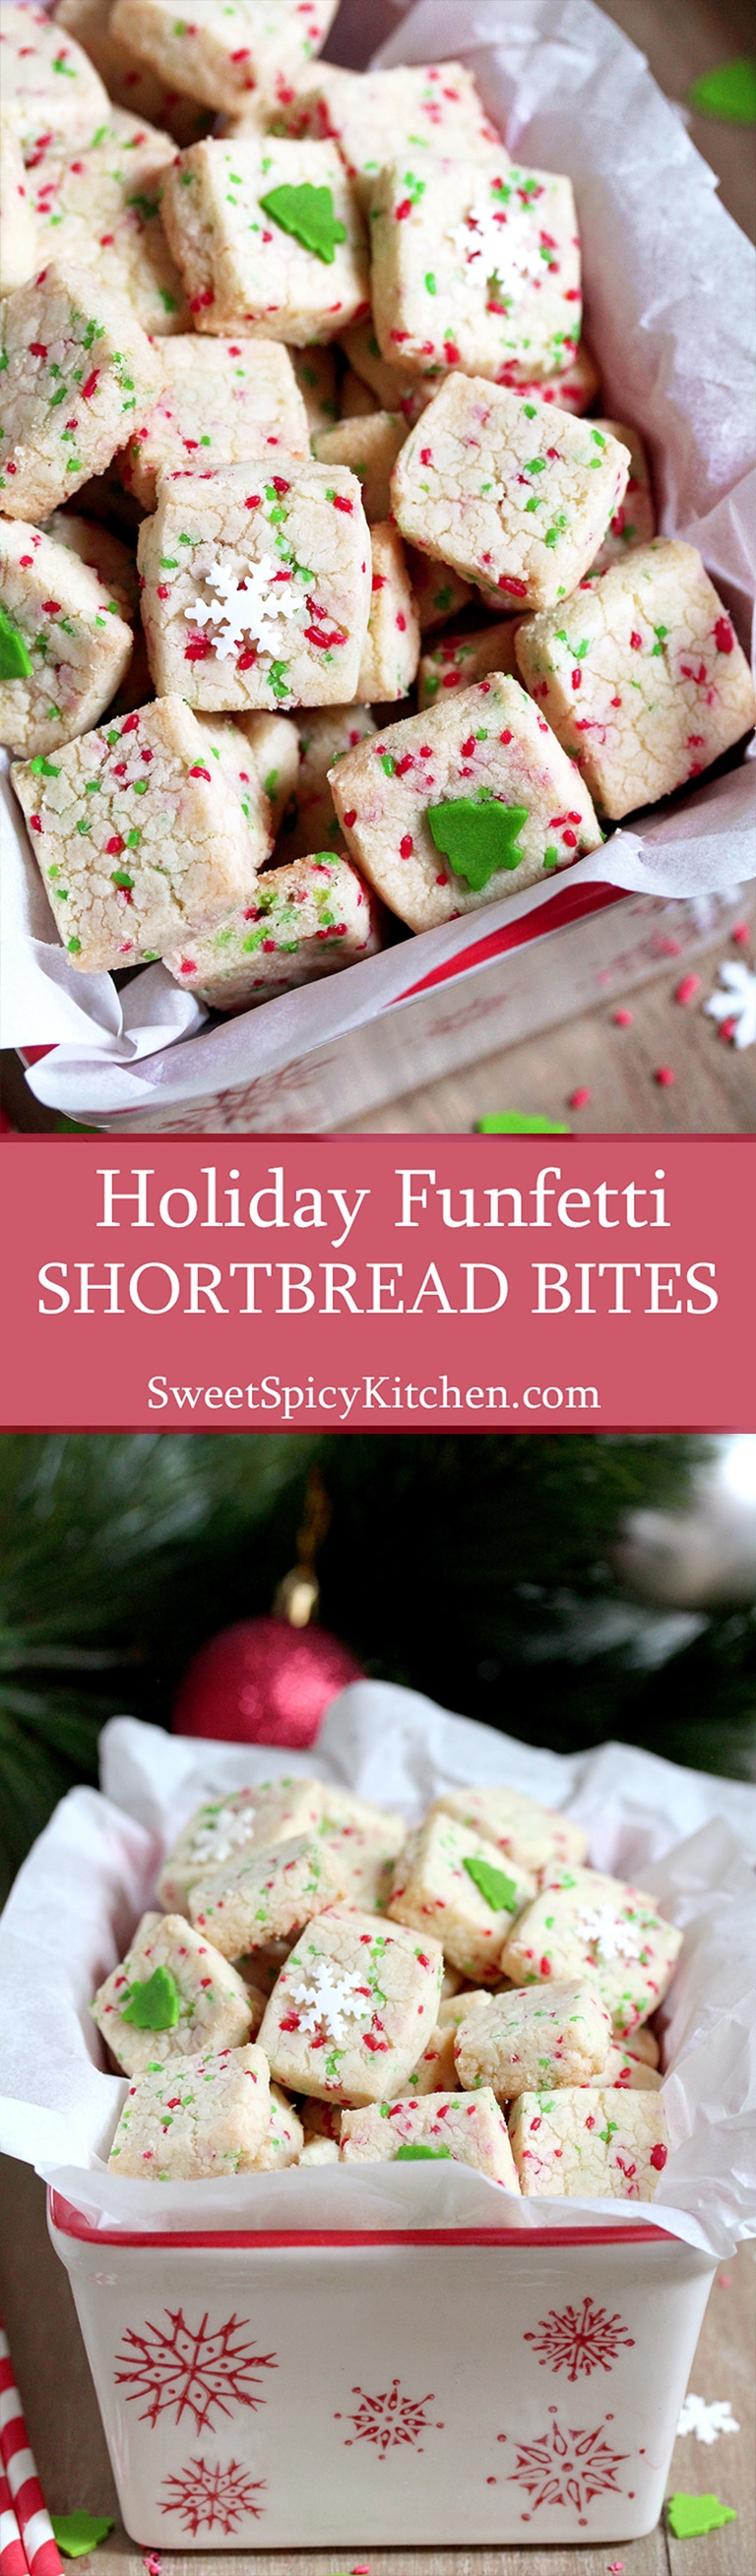 Holiday Funfetti Shortbread Bites – quick & easy, sweet, crunchy bites are perfect for holidays. Christmas, New Year, Easter, Fourth of July – just make sure to match the sprinkles color with the holiday.